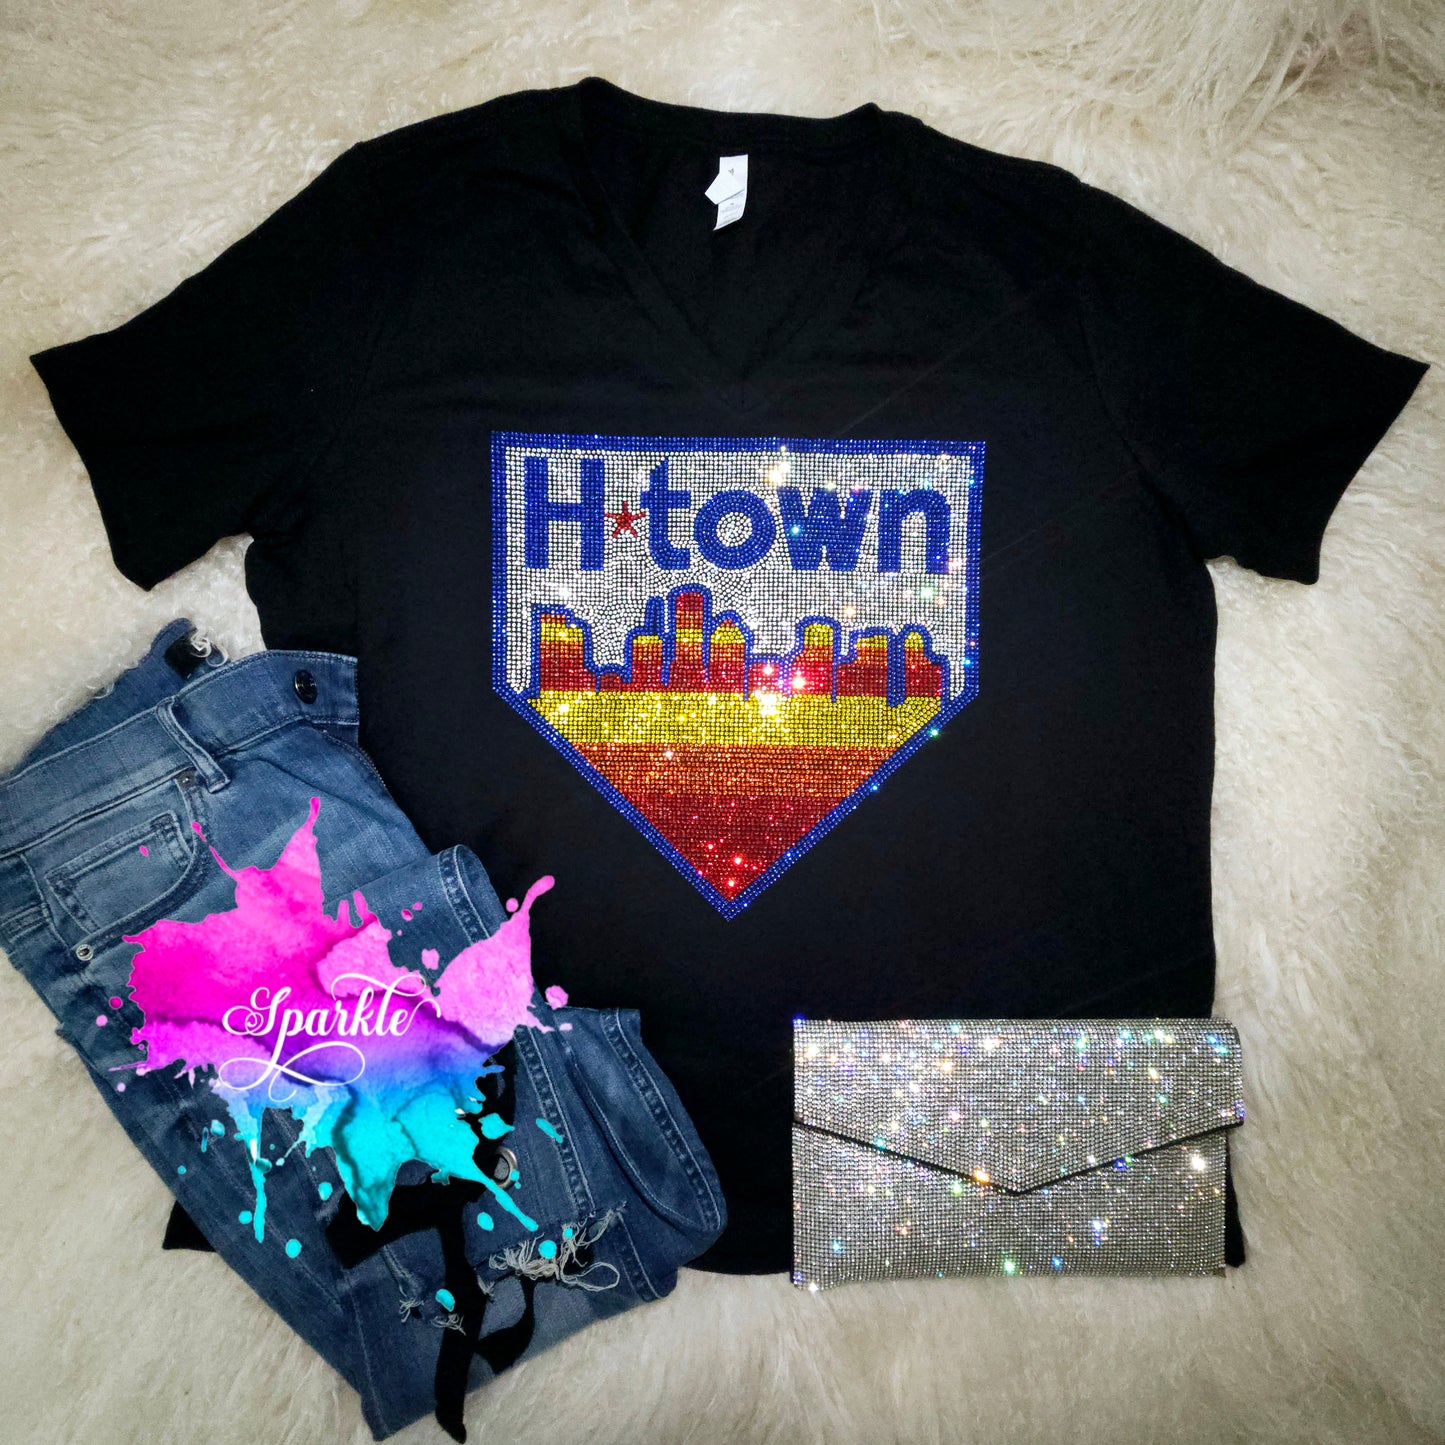 H-Town Crystallized Tee